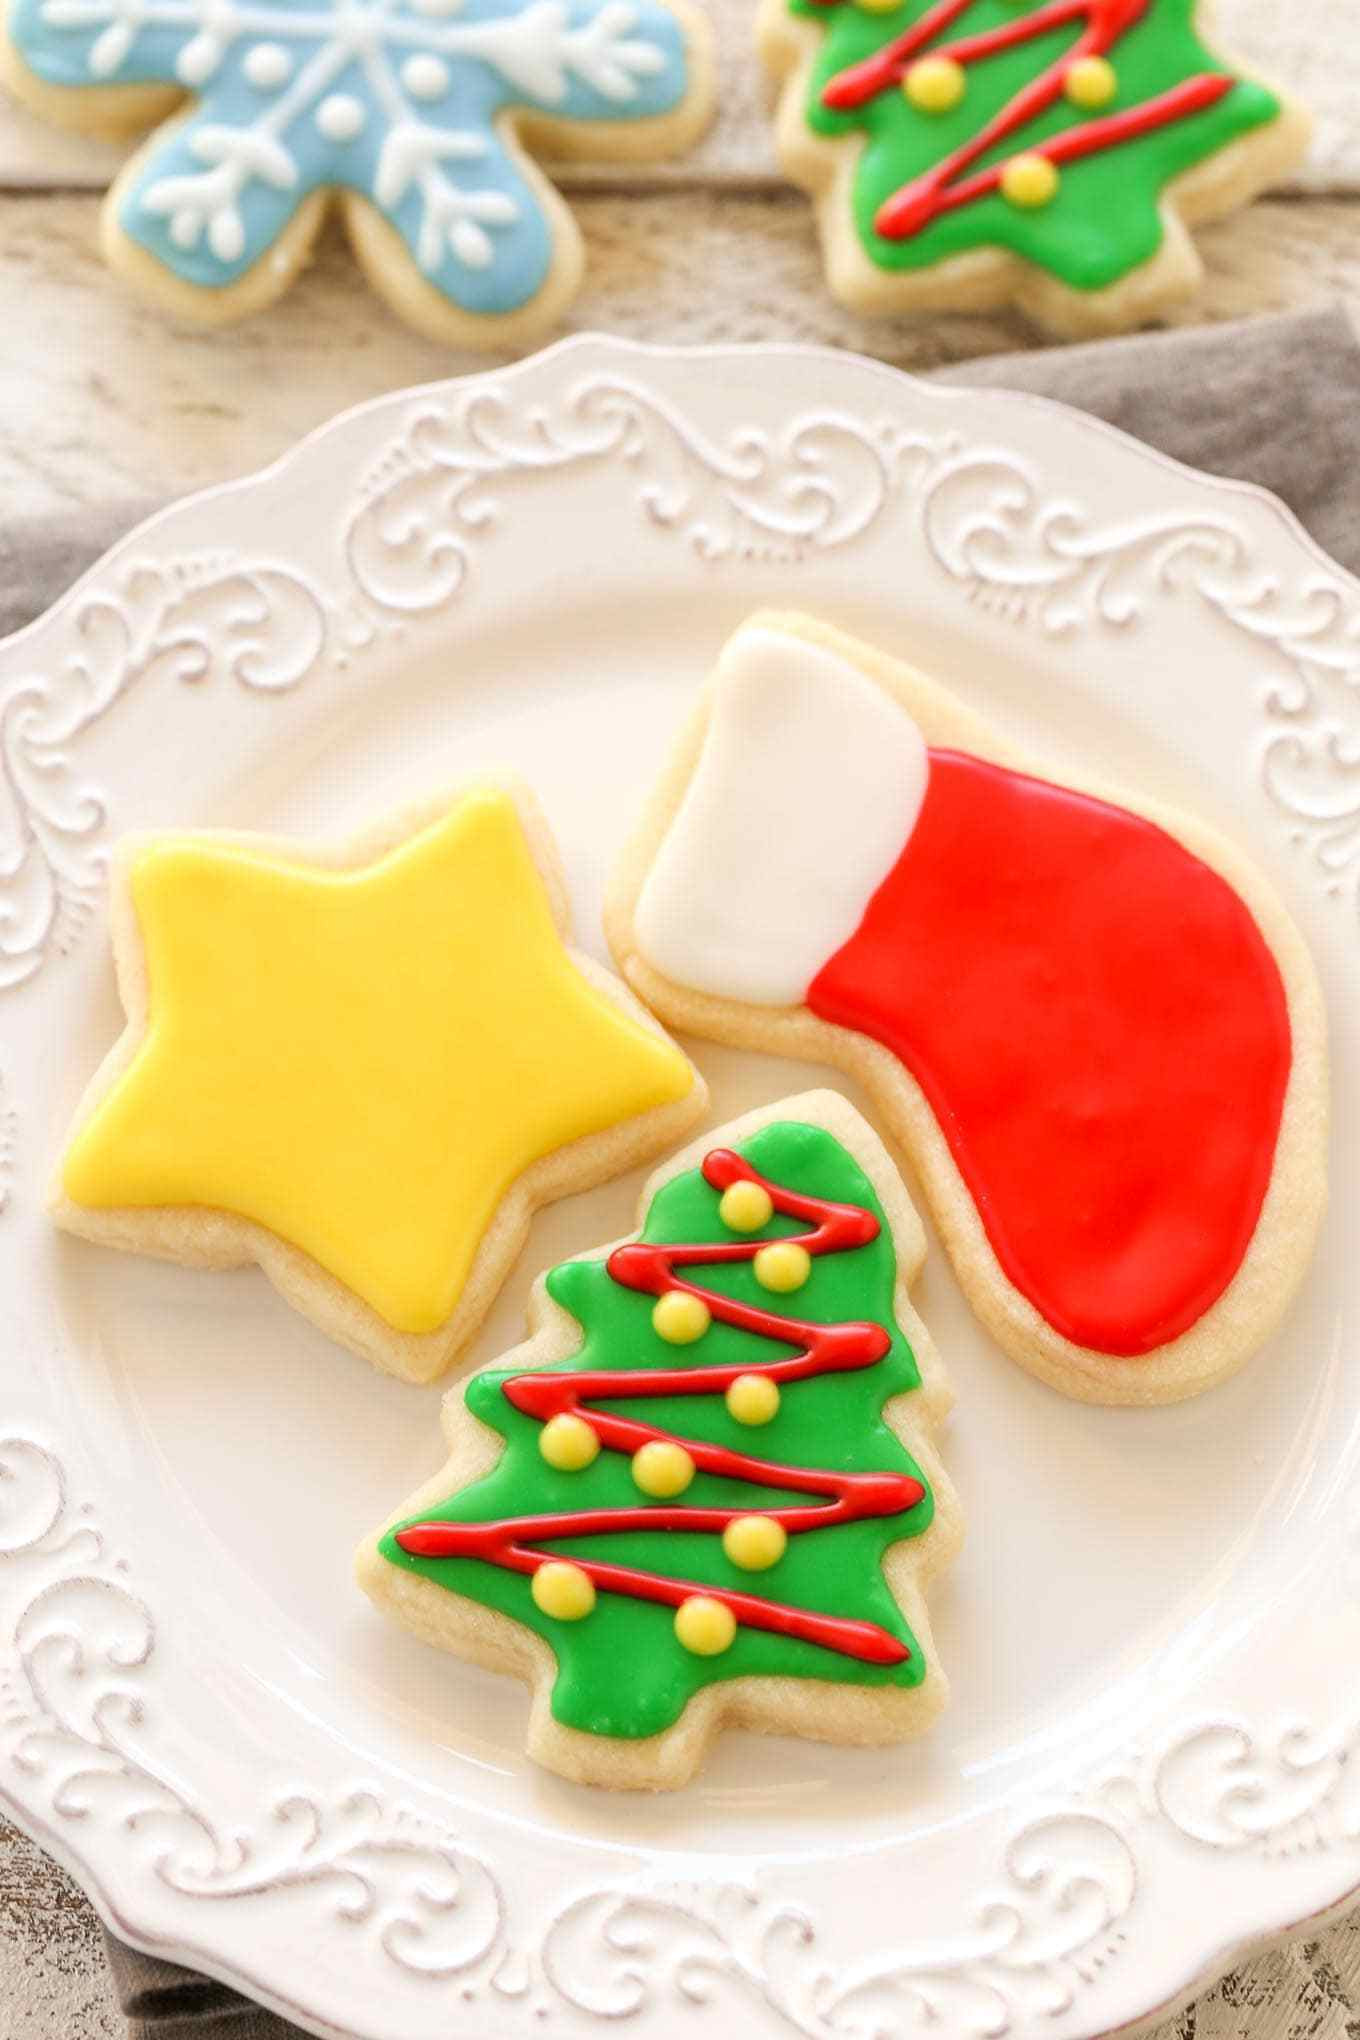 Christmas Sugar Cookie Icing Recipes
 Soft Christmas Cut Out Sugar Cookies Live Well Bake ten